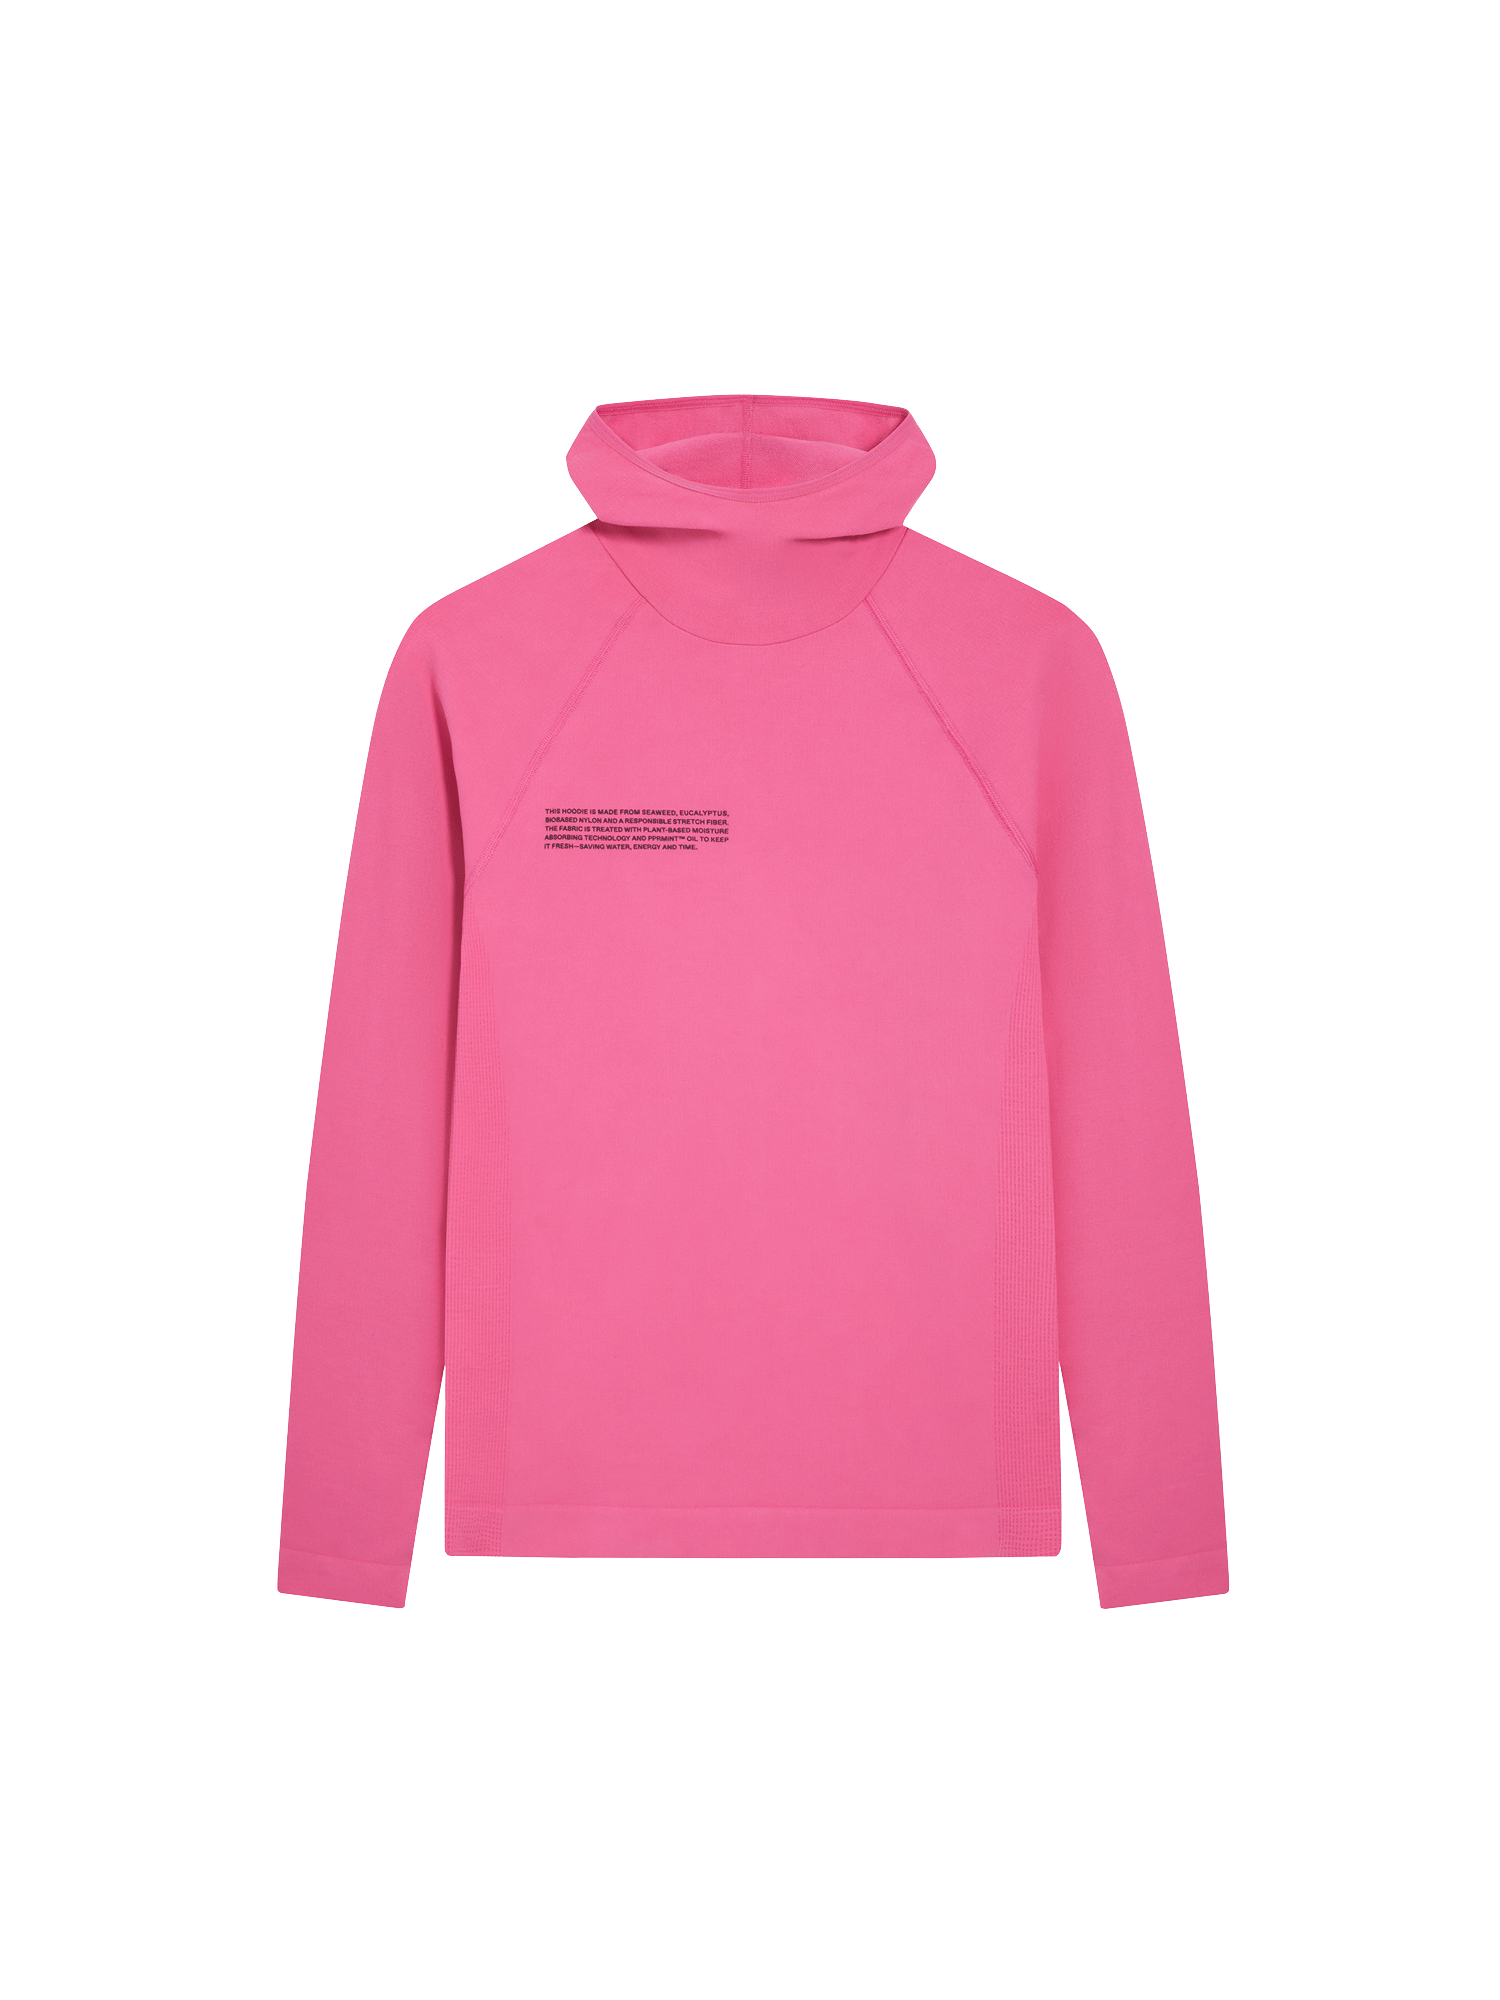 https://storage.googleapis.com/download/storage/v1/b/whering.appspot.com/o/marketplace_product_images%2Fpangaia-archive-womens-activewear-hoodieflamingo-pink-ayraCTiudQhQyXkyLNNMws.png?generation=1692162028158909&alt=media